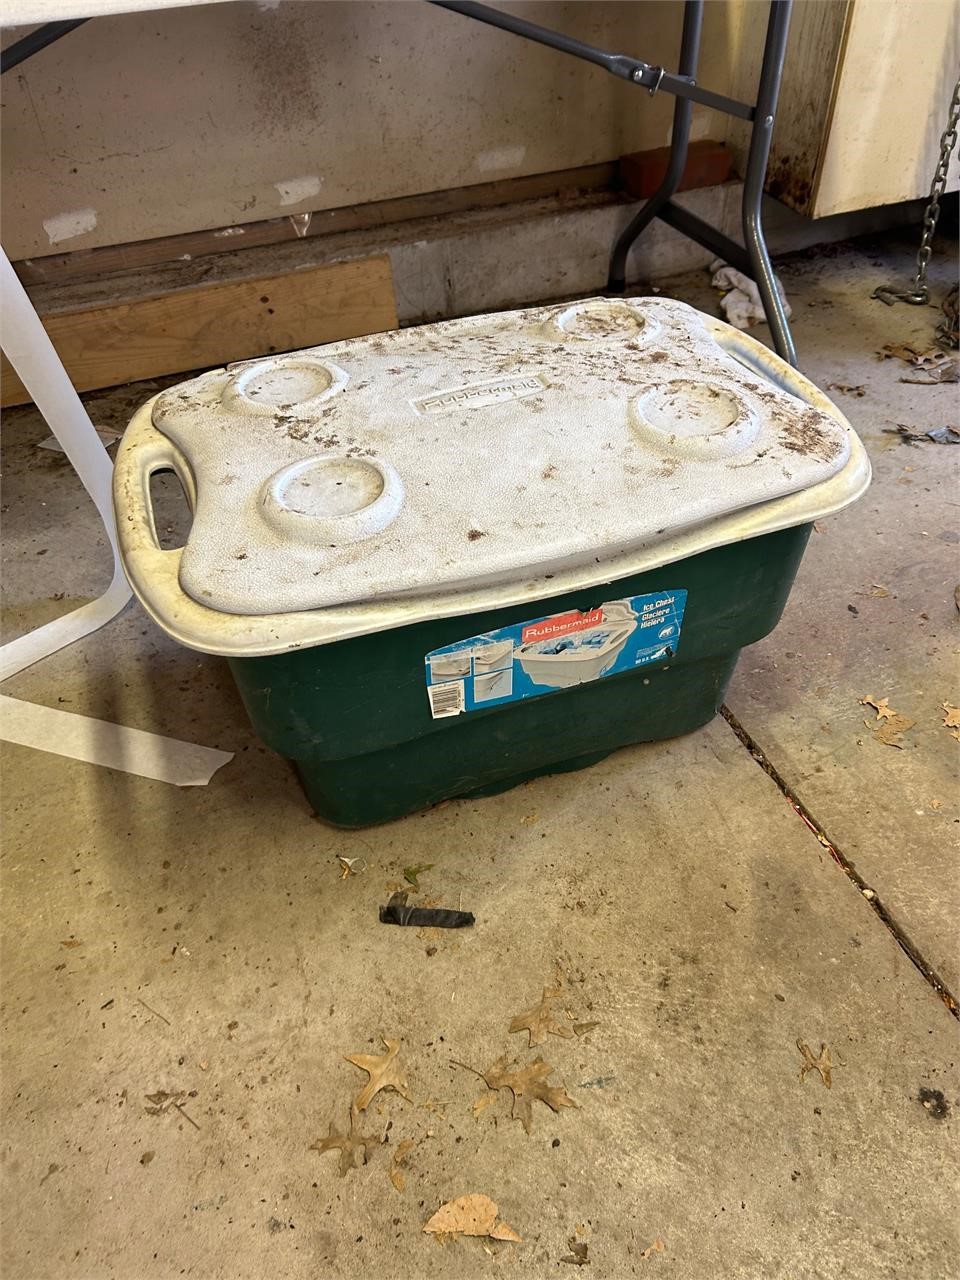 Rubbermaid Cooler full of Weights